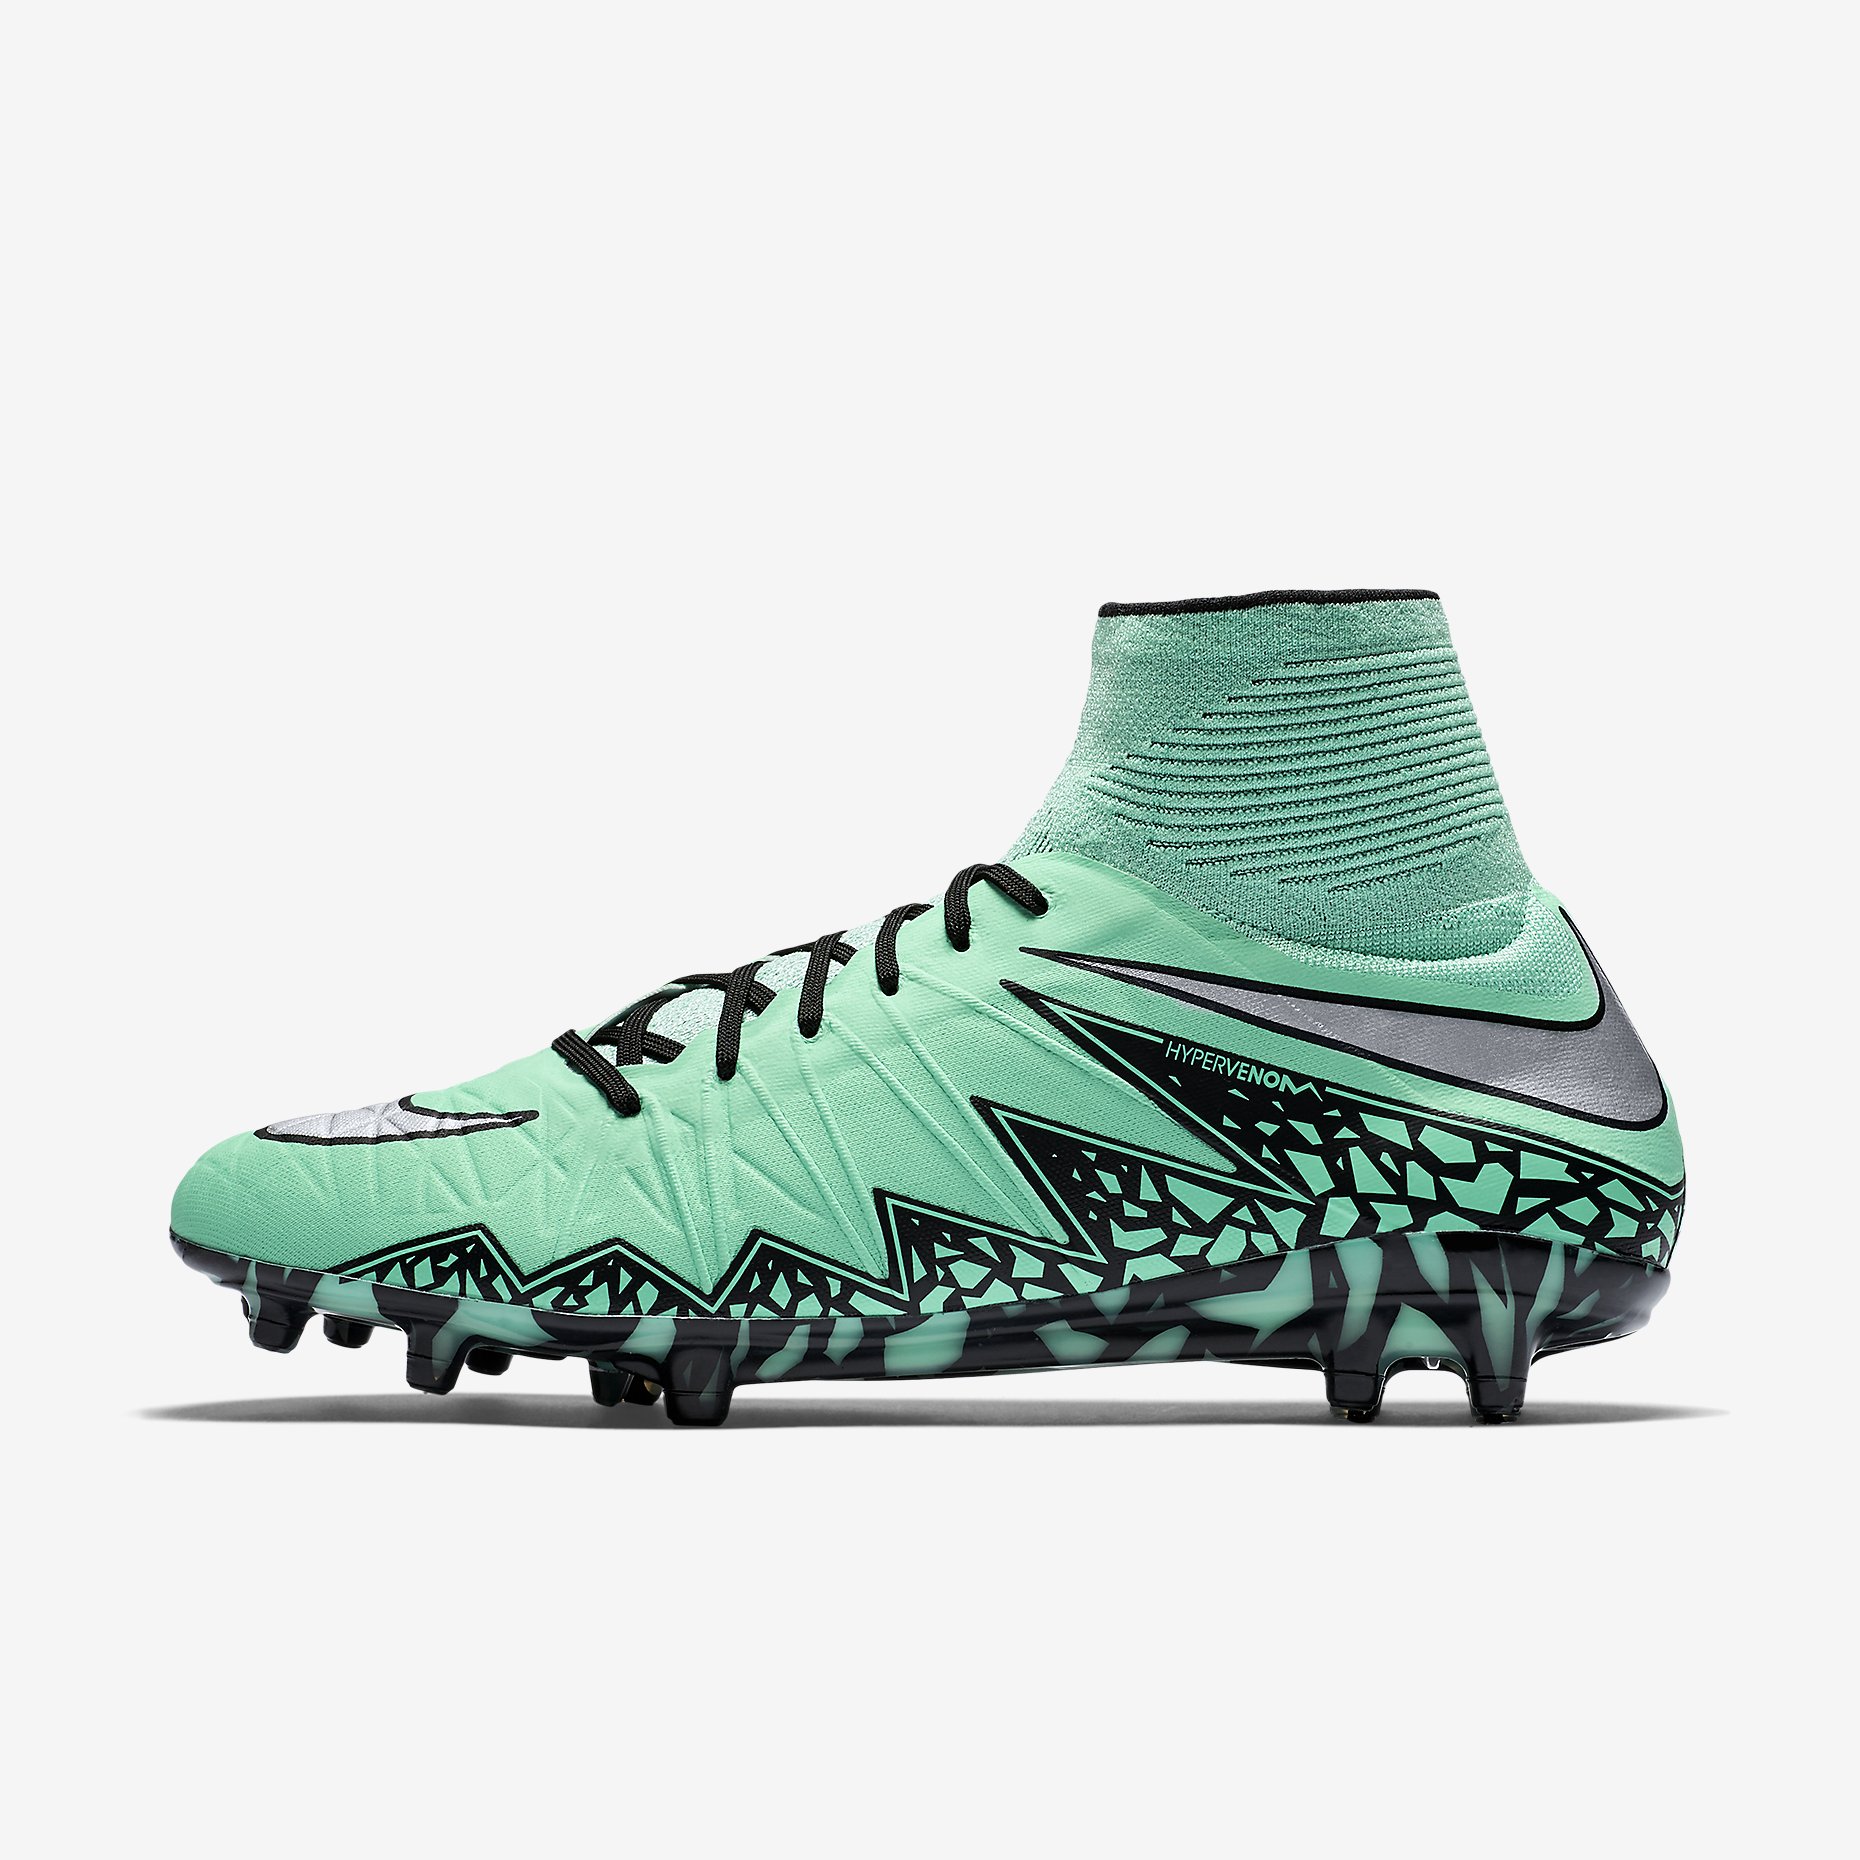 Nike Phantom Vision Pro DF Boot Review Soccer Cleats 101